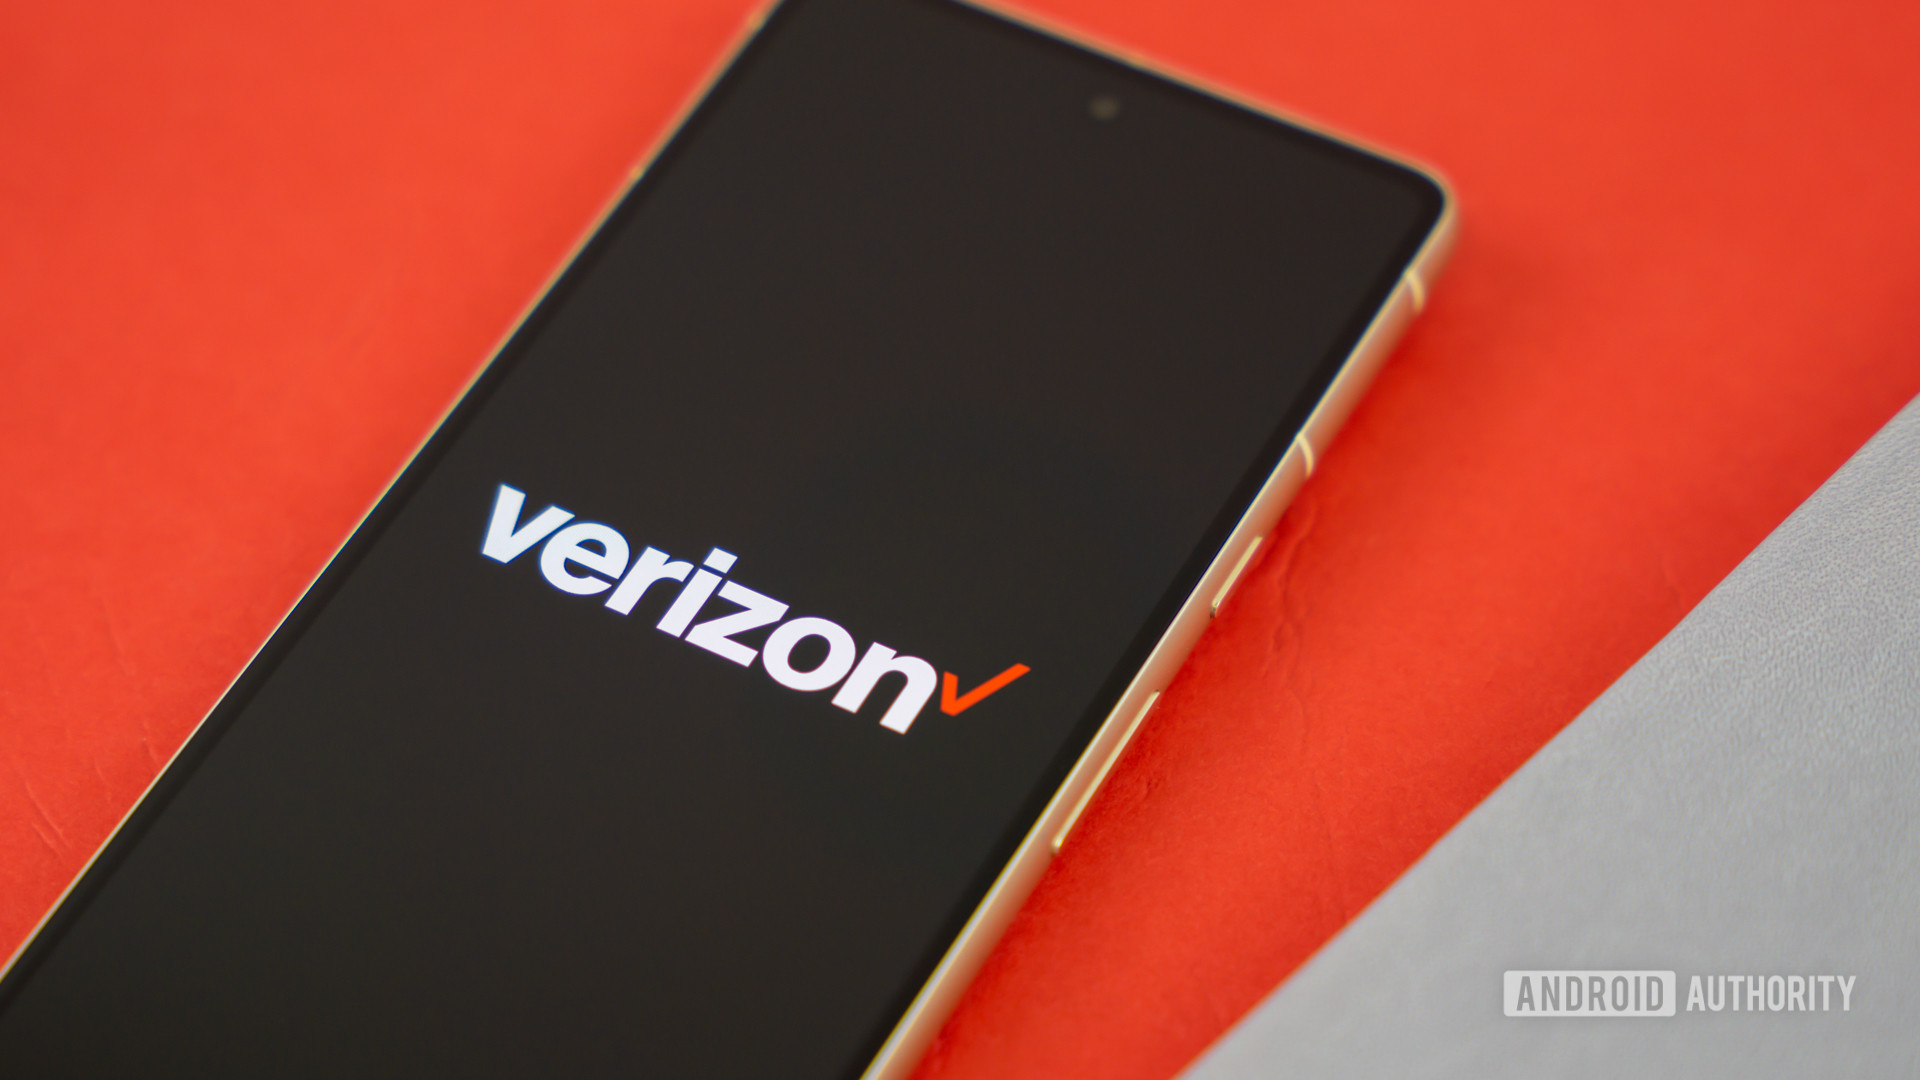 Verizon logo on smartphone with a colored background Stock photo 6